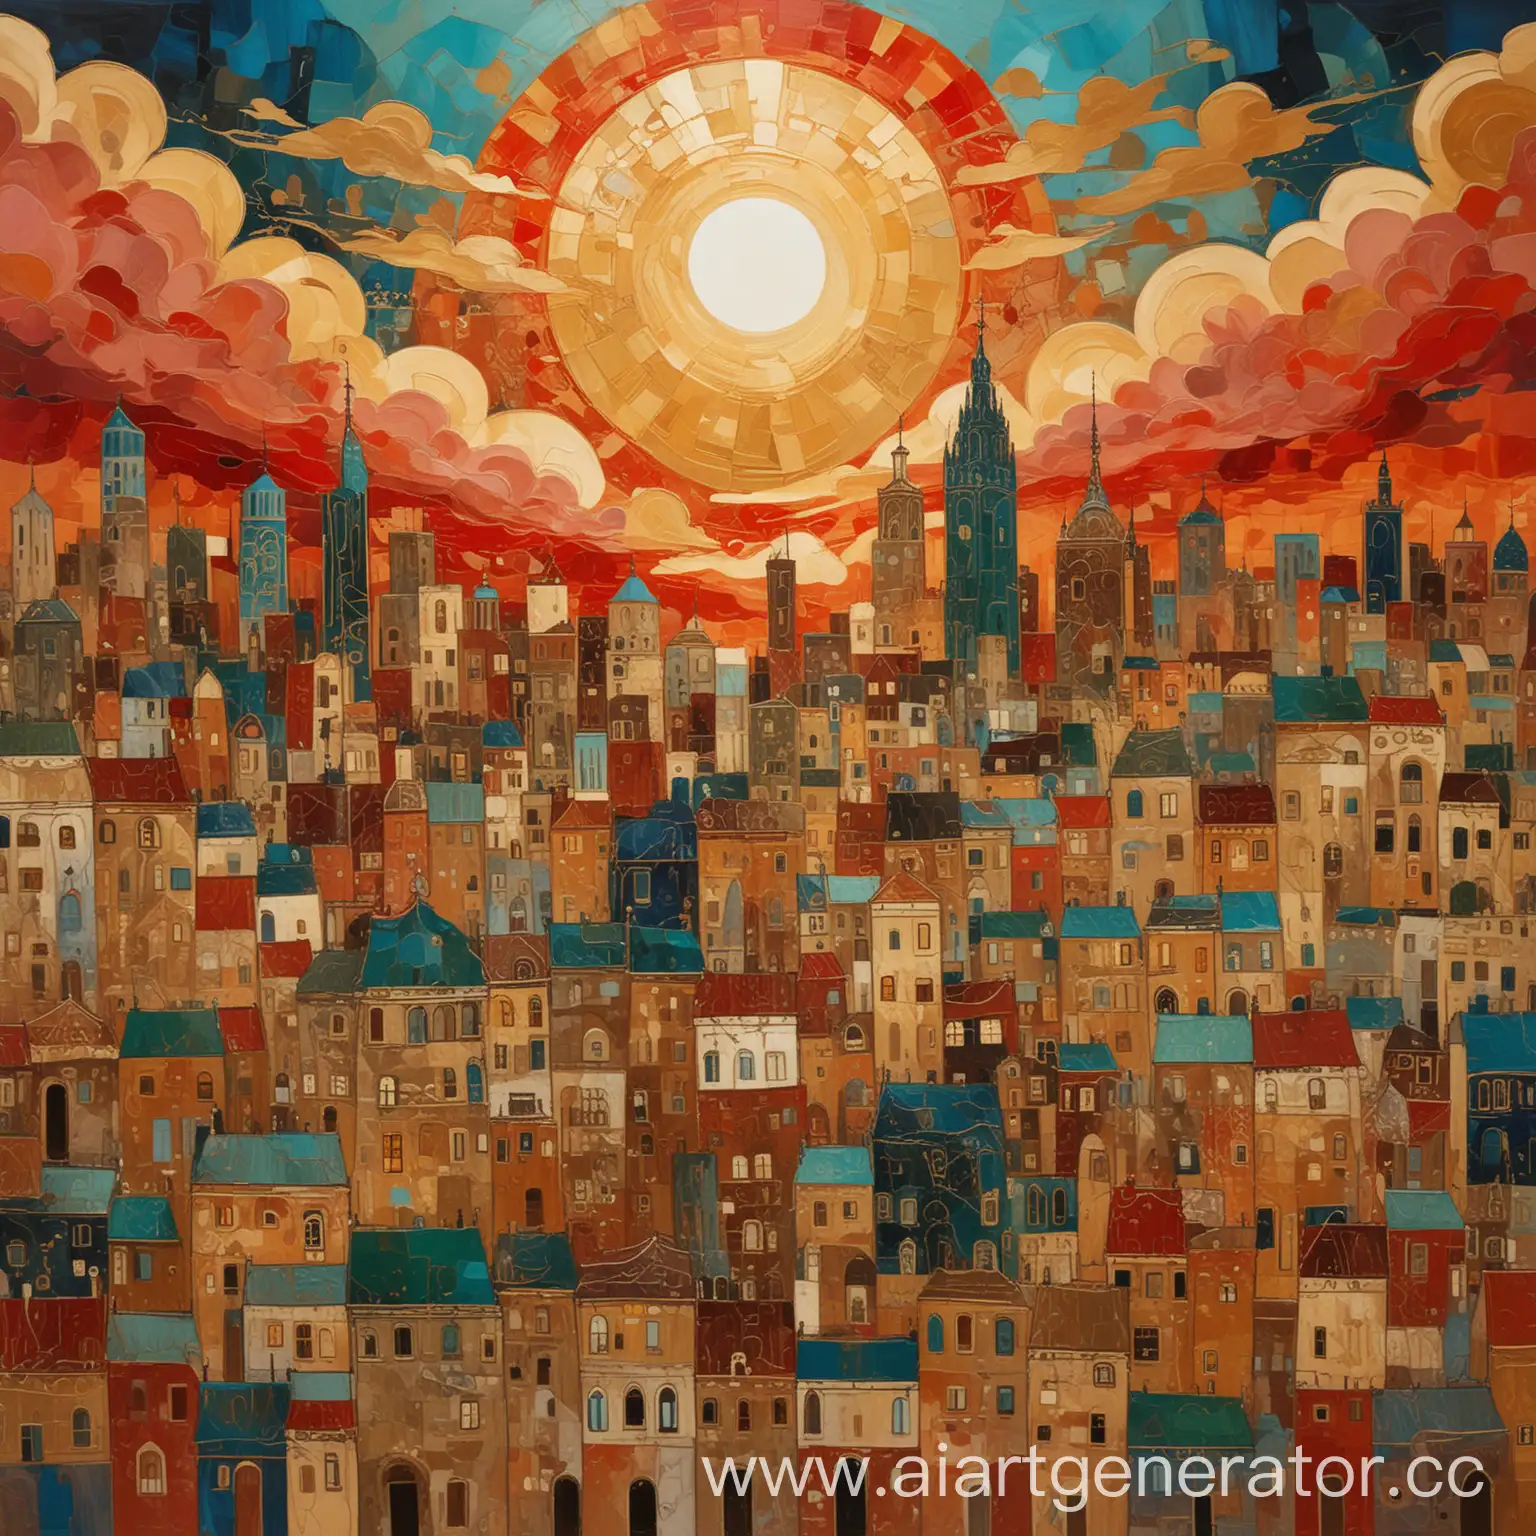 Abstract-Oil-Painting-Golden-Cityscape-with-Byzantine-Ornaments-and-Red-Sunset-Sky